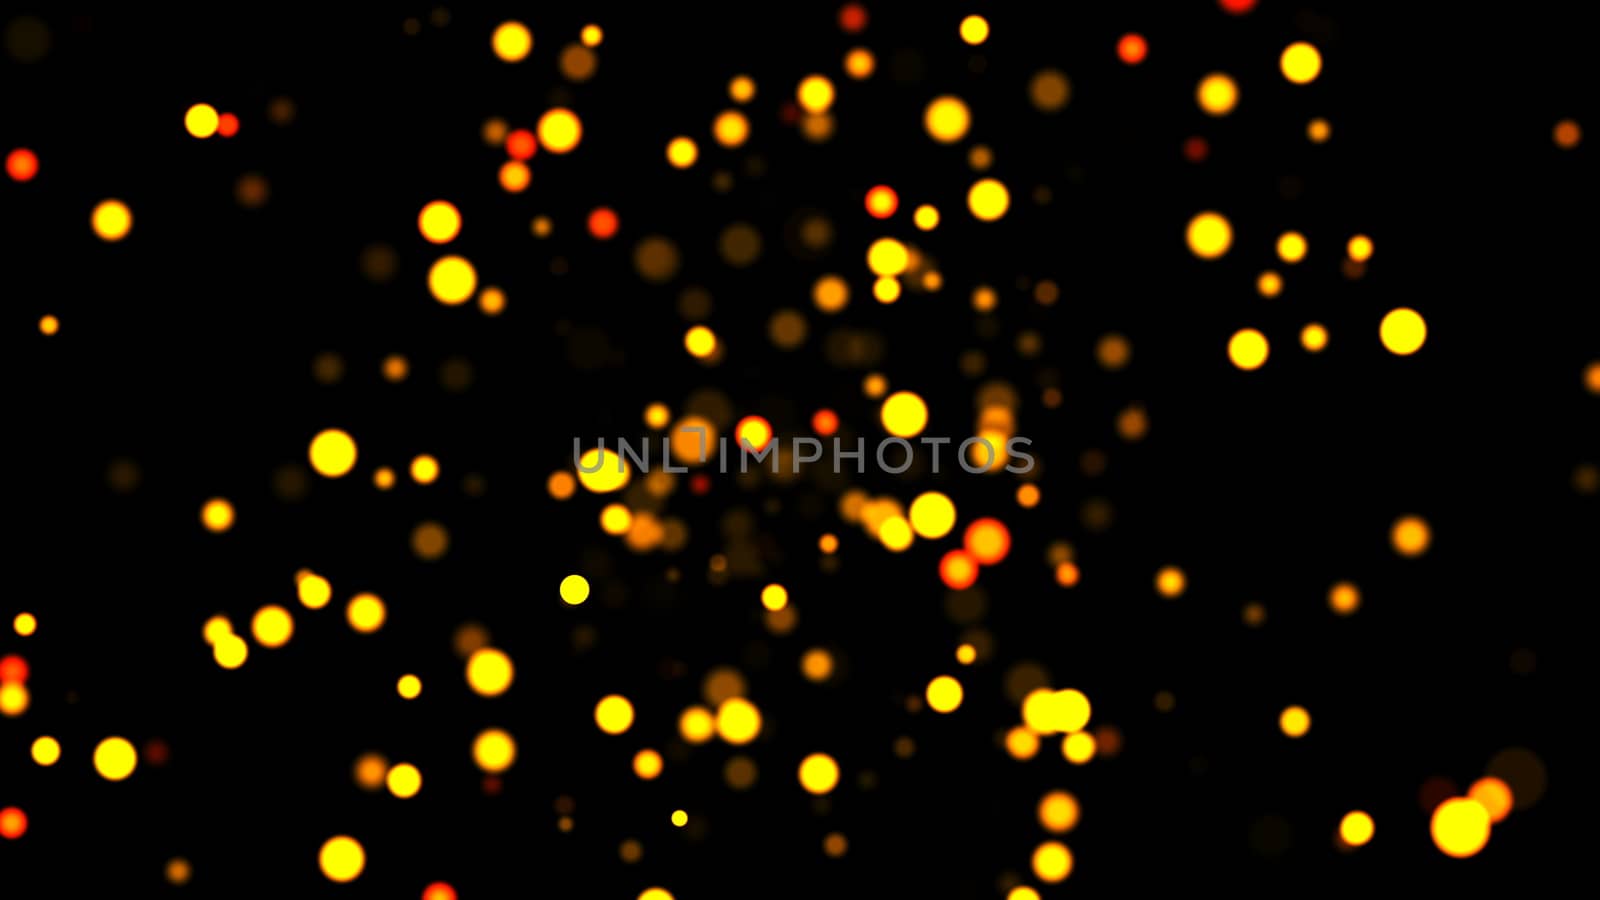 Space with many bright shiny led lights, computer generated modern abstract background, 3d rendering